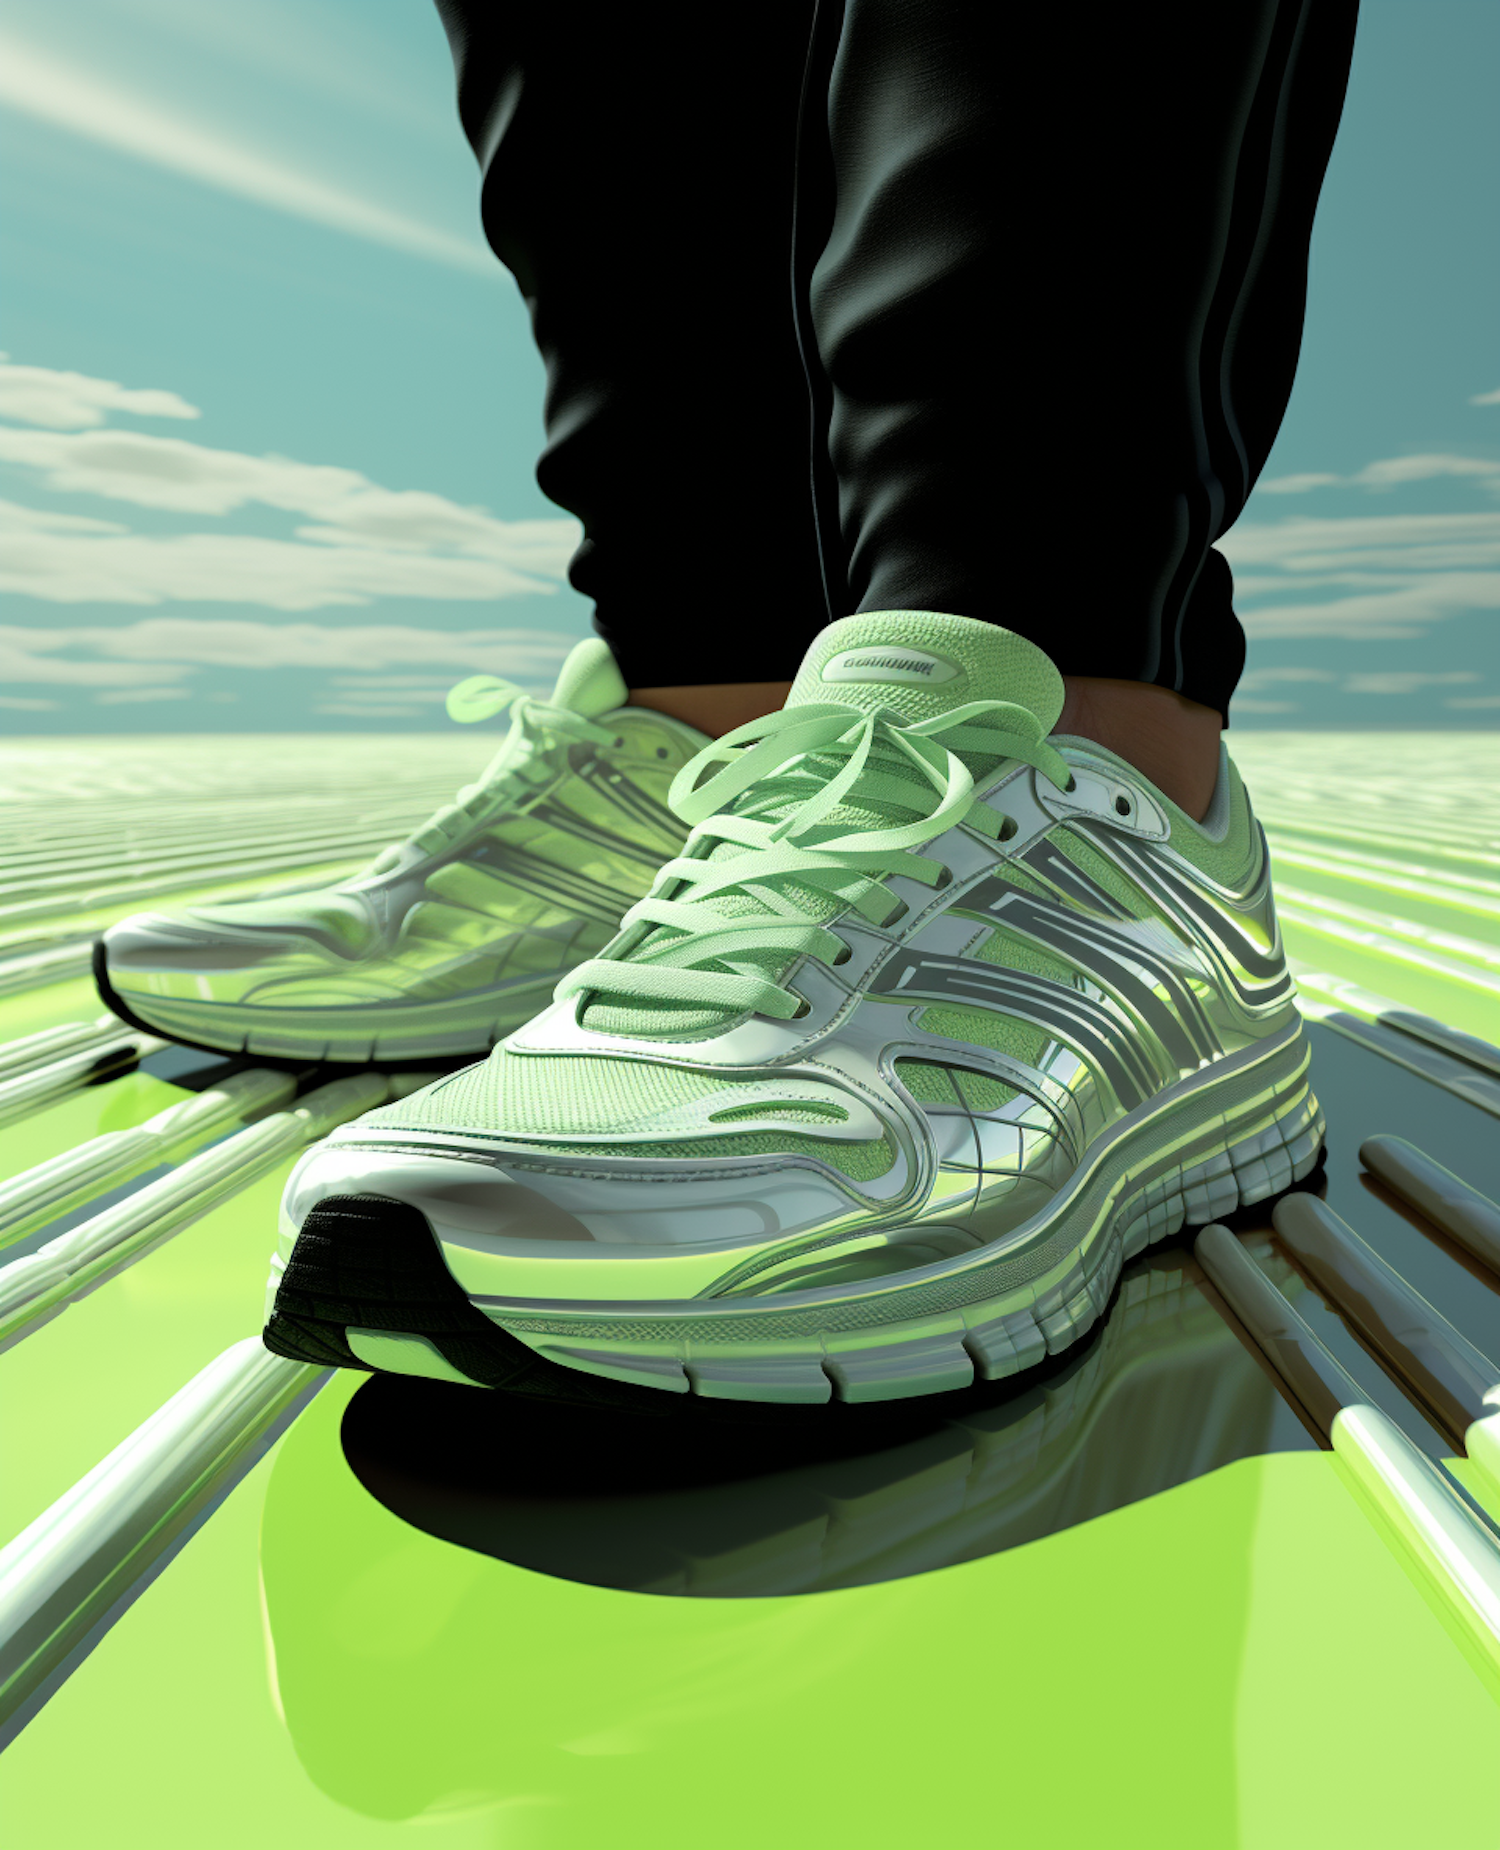 Ready to Run - Modern Green Athletic Shoes in Action